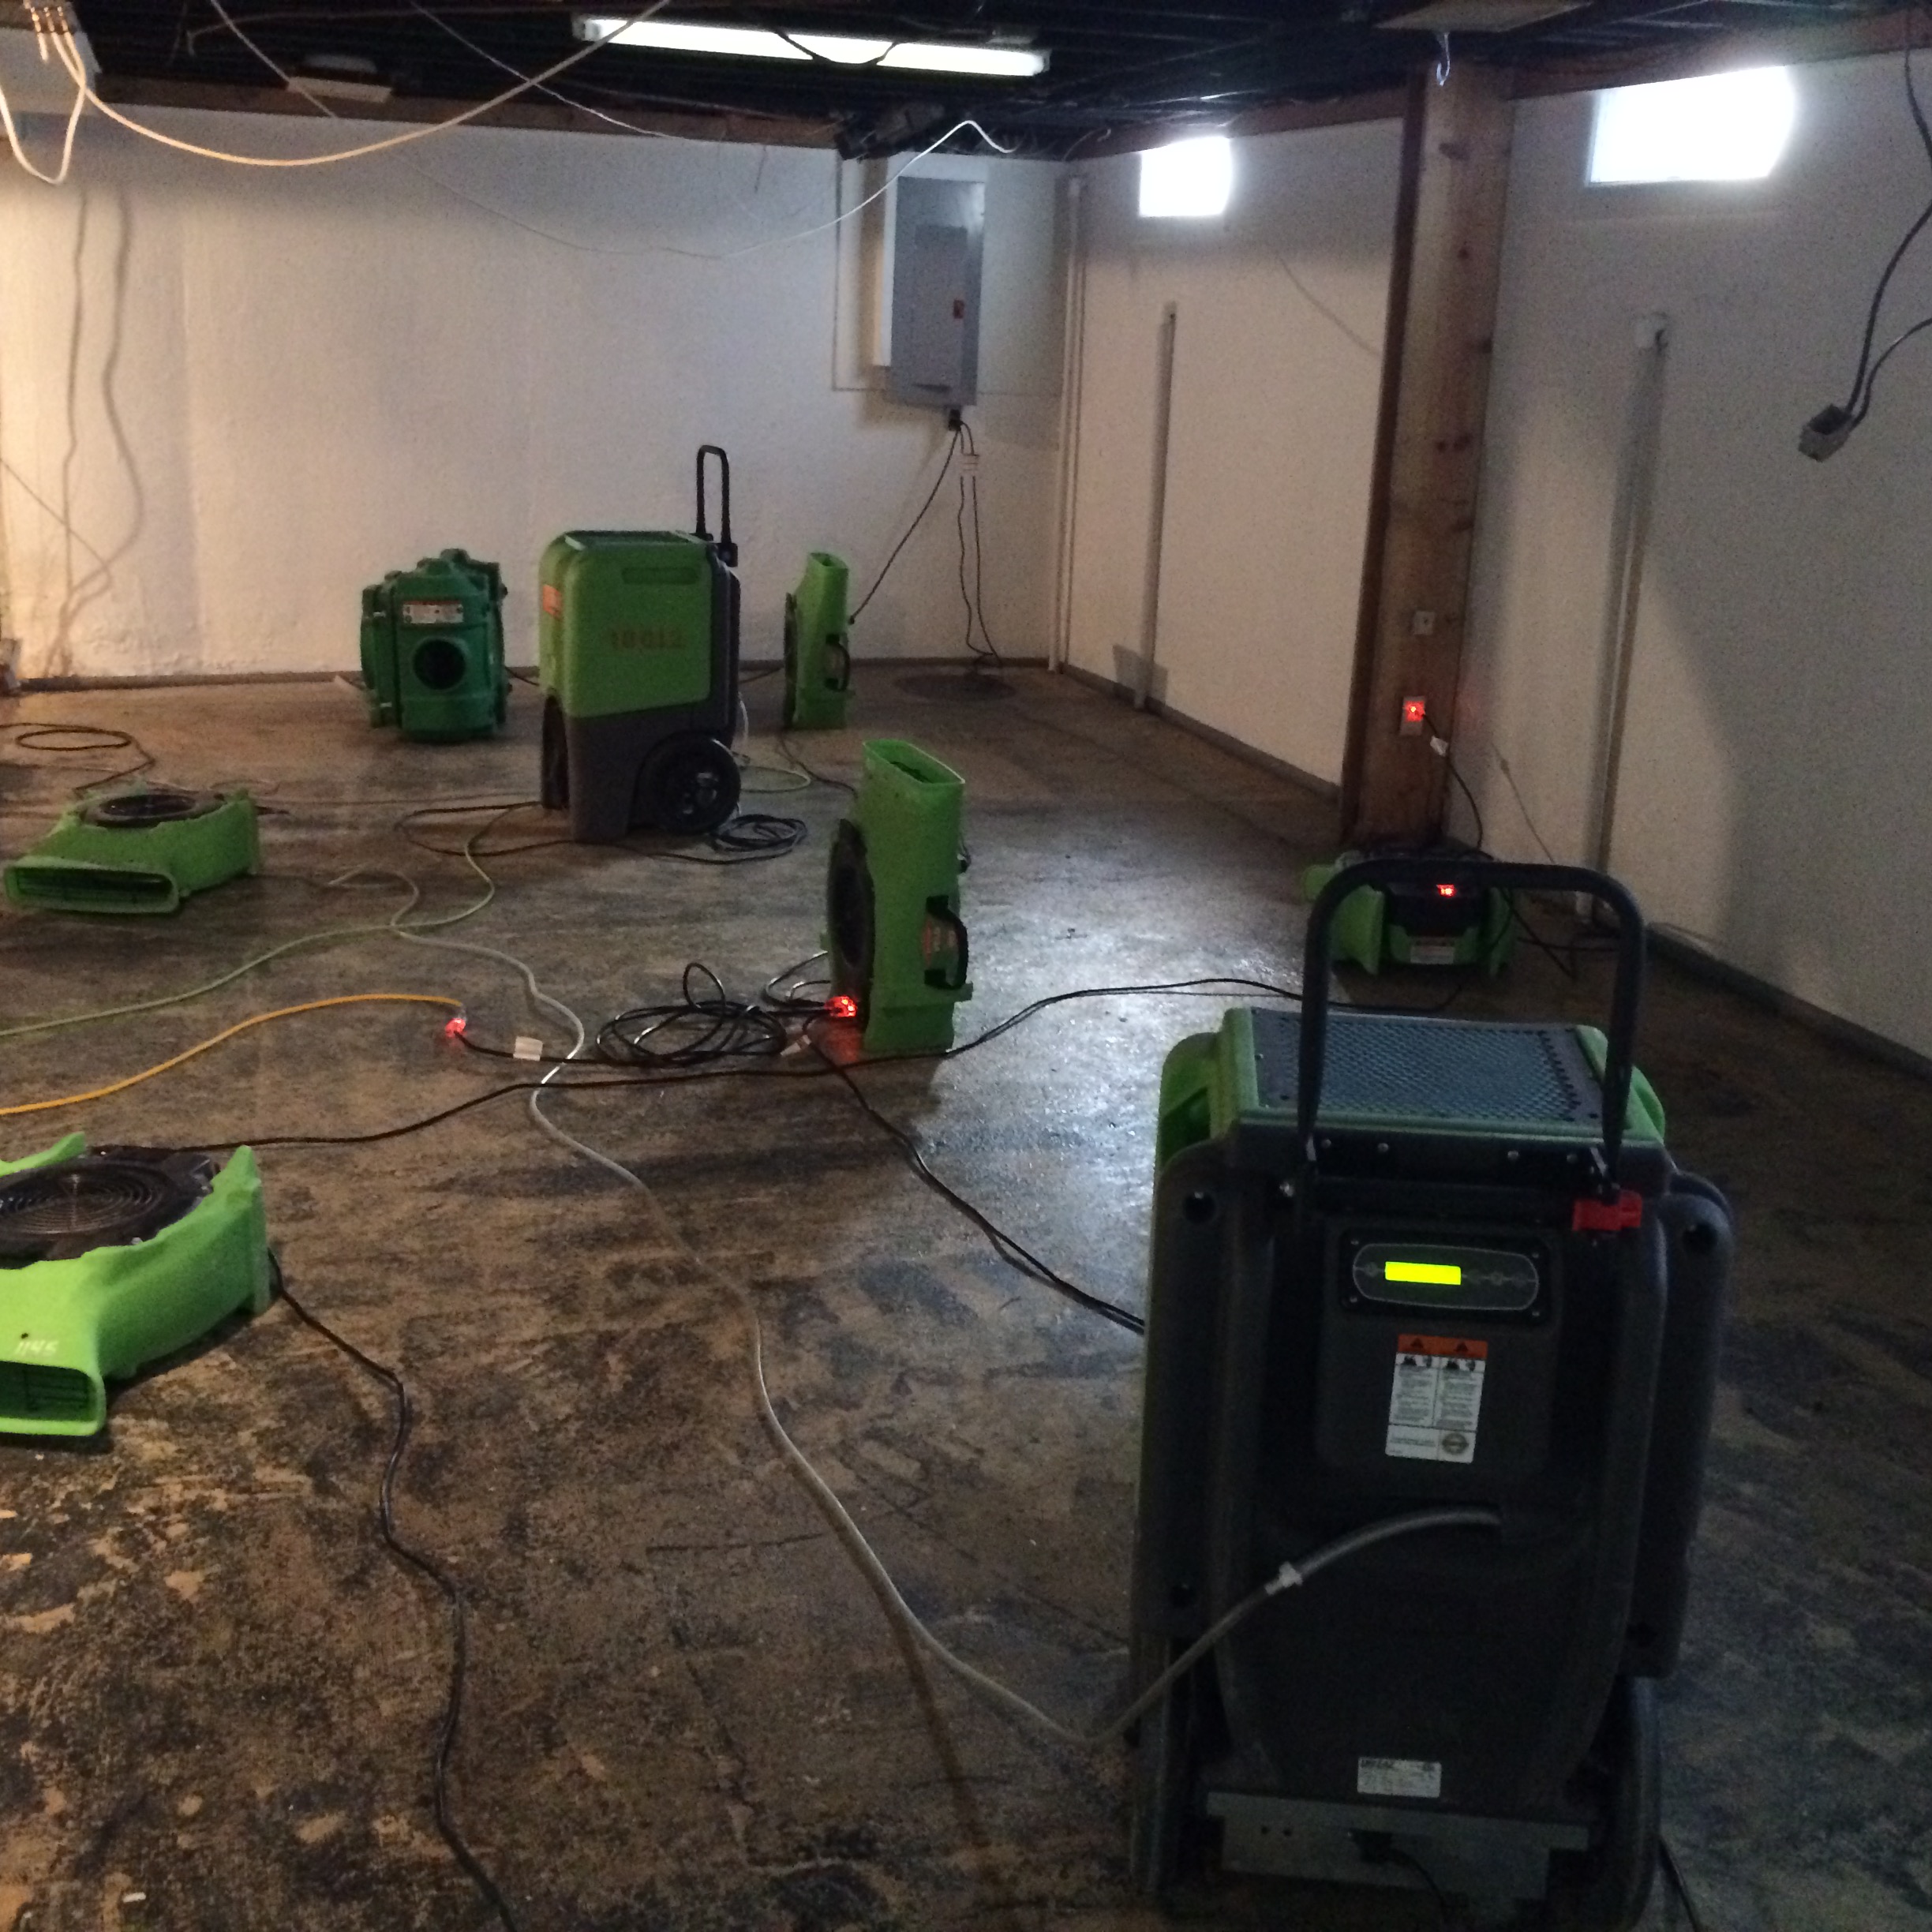 Got the SERVPRO equipment up and running in a basement!